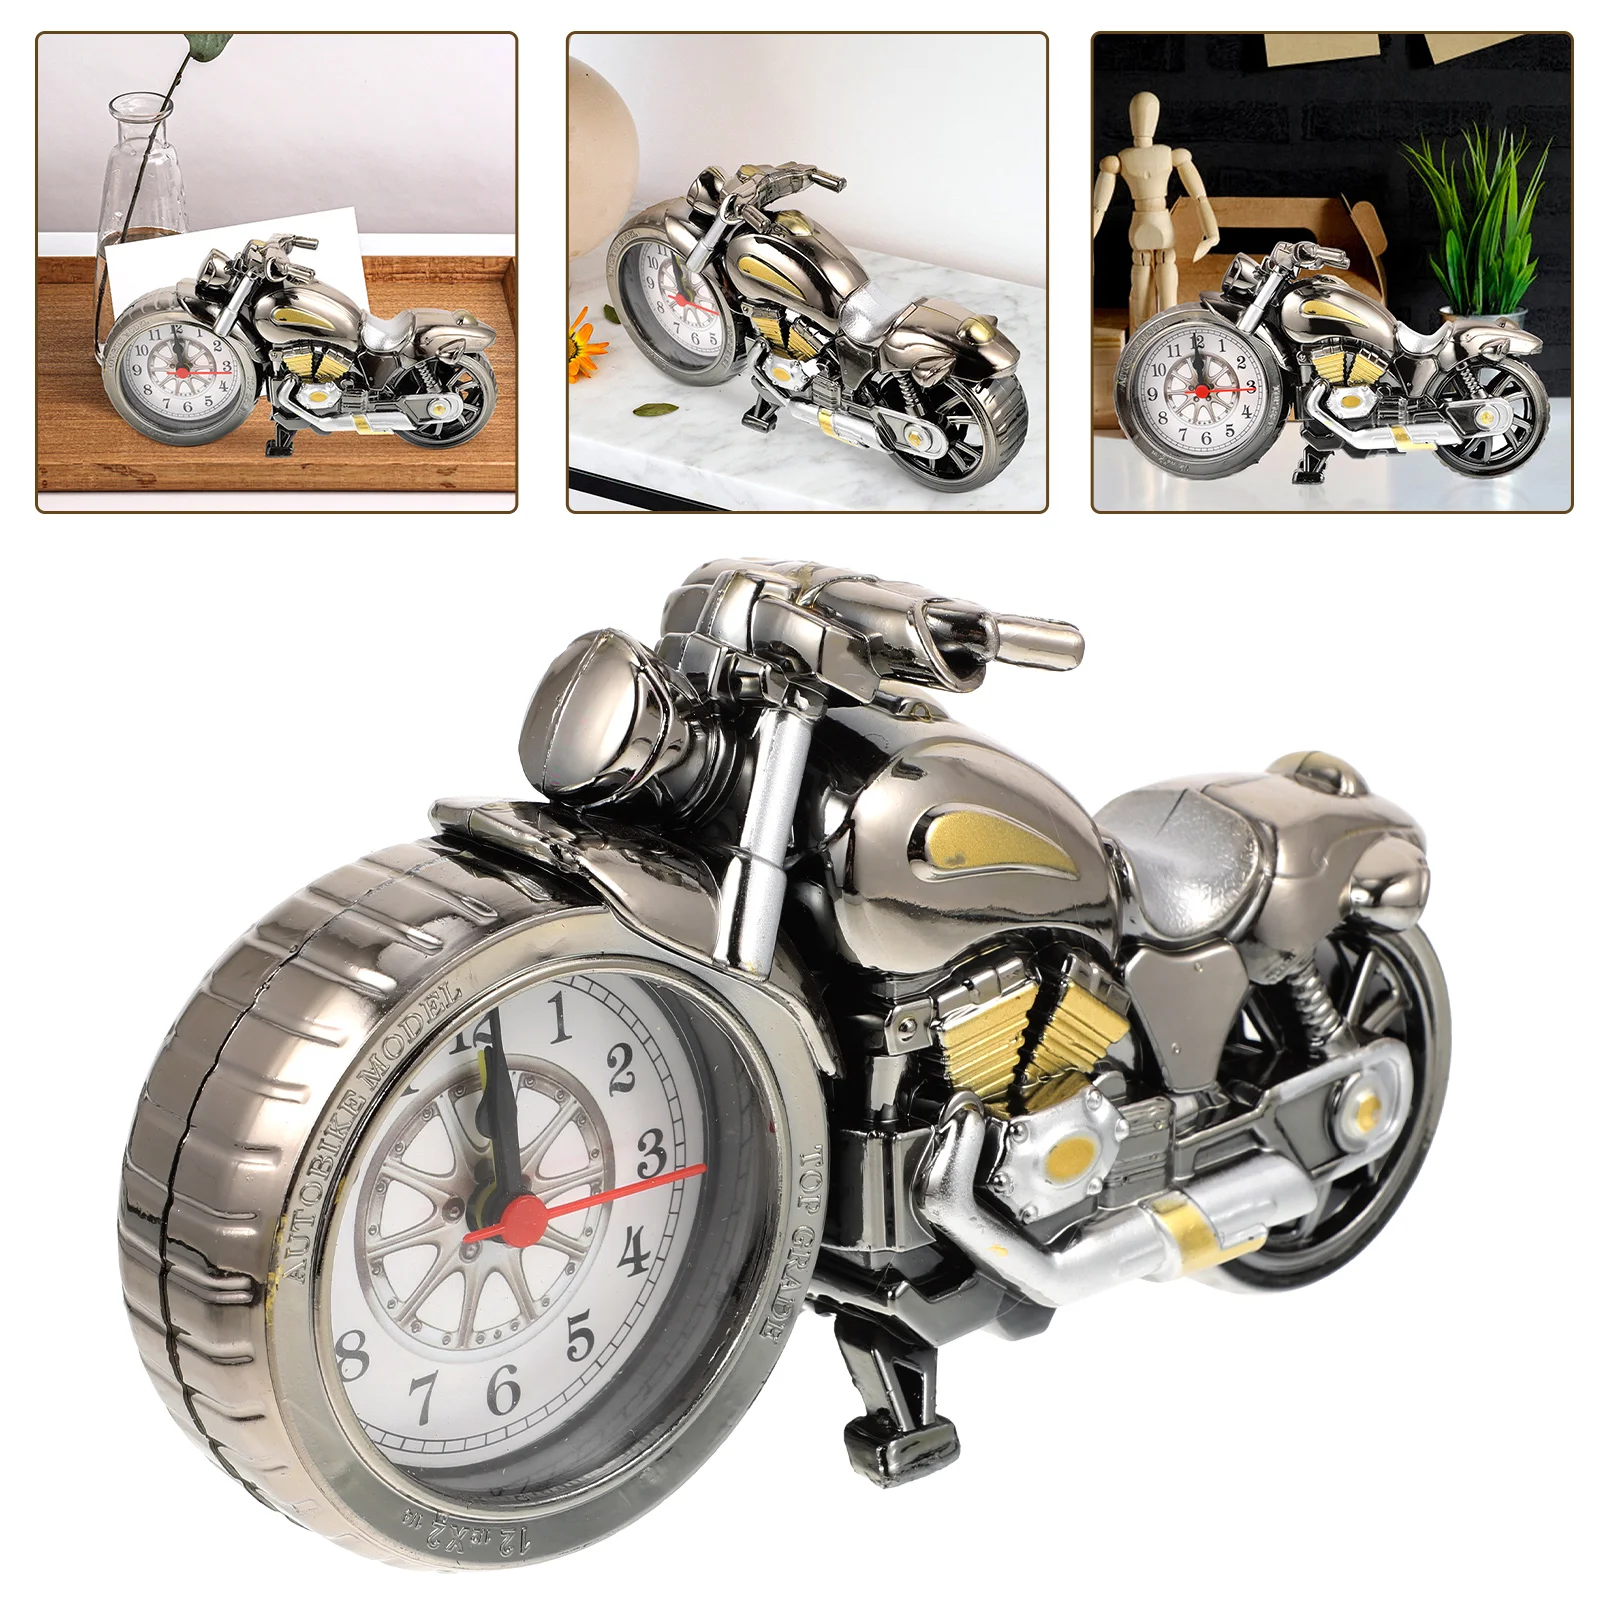 

Vintage Desk Clock Motorcycle Tabletop Clock Non Ticking Battery Operated Desk Shelf Clocks Motorcycle Sculpture Home